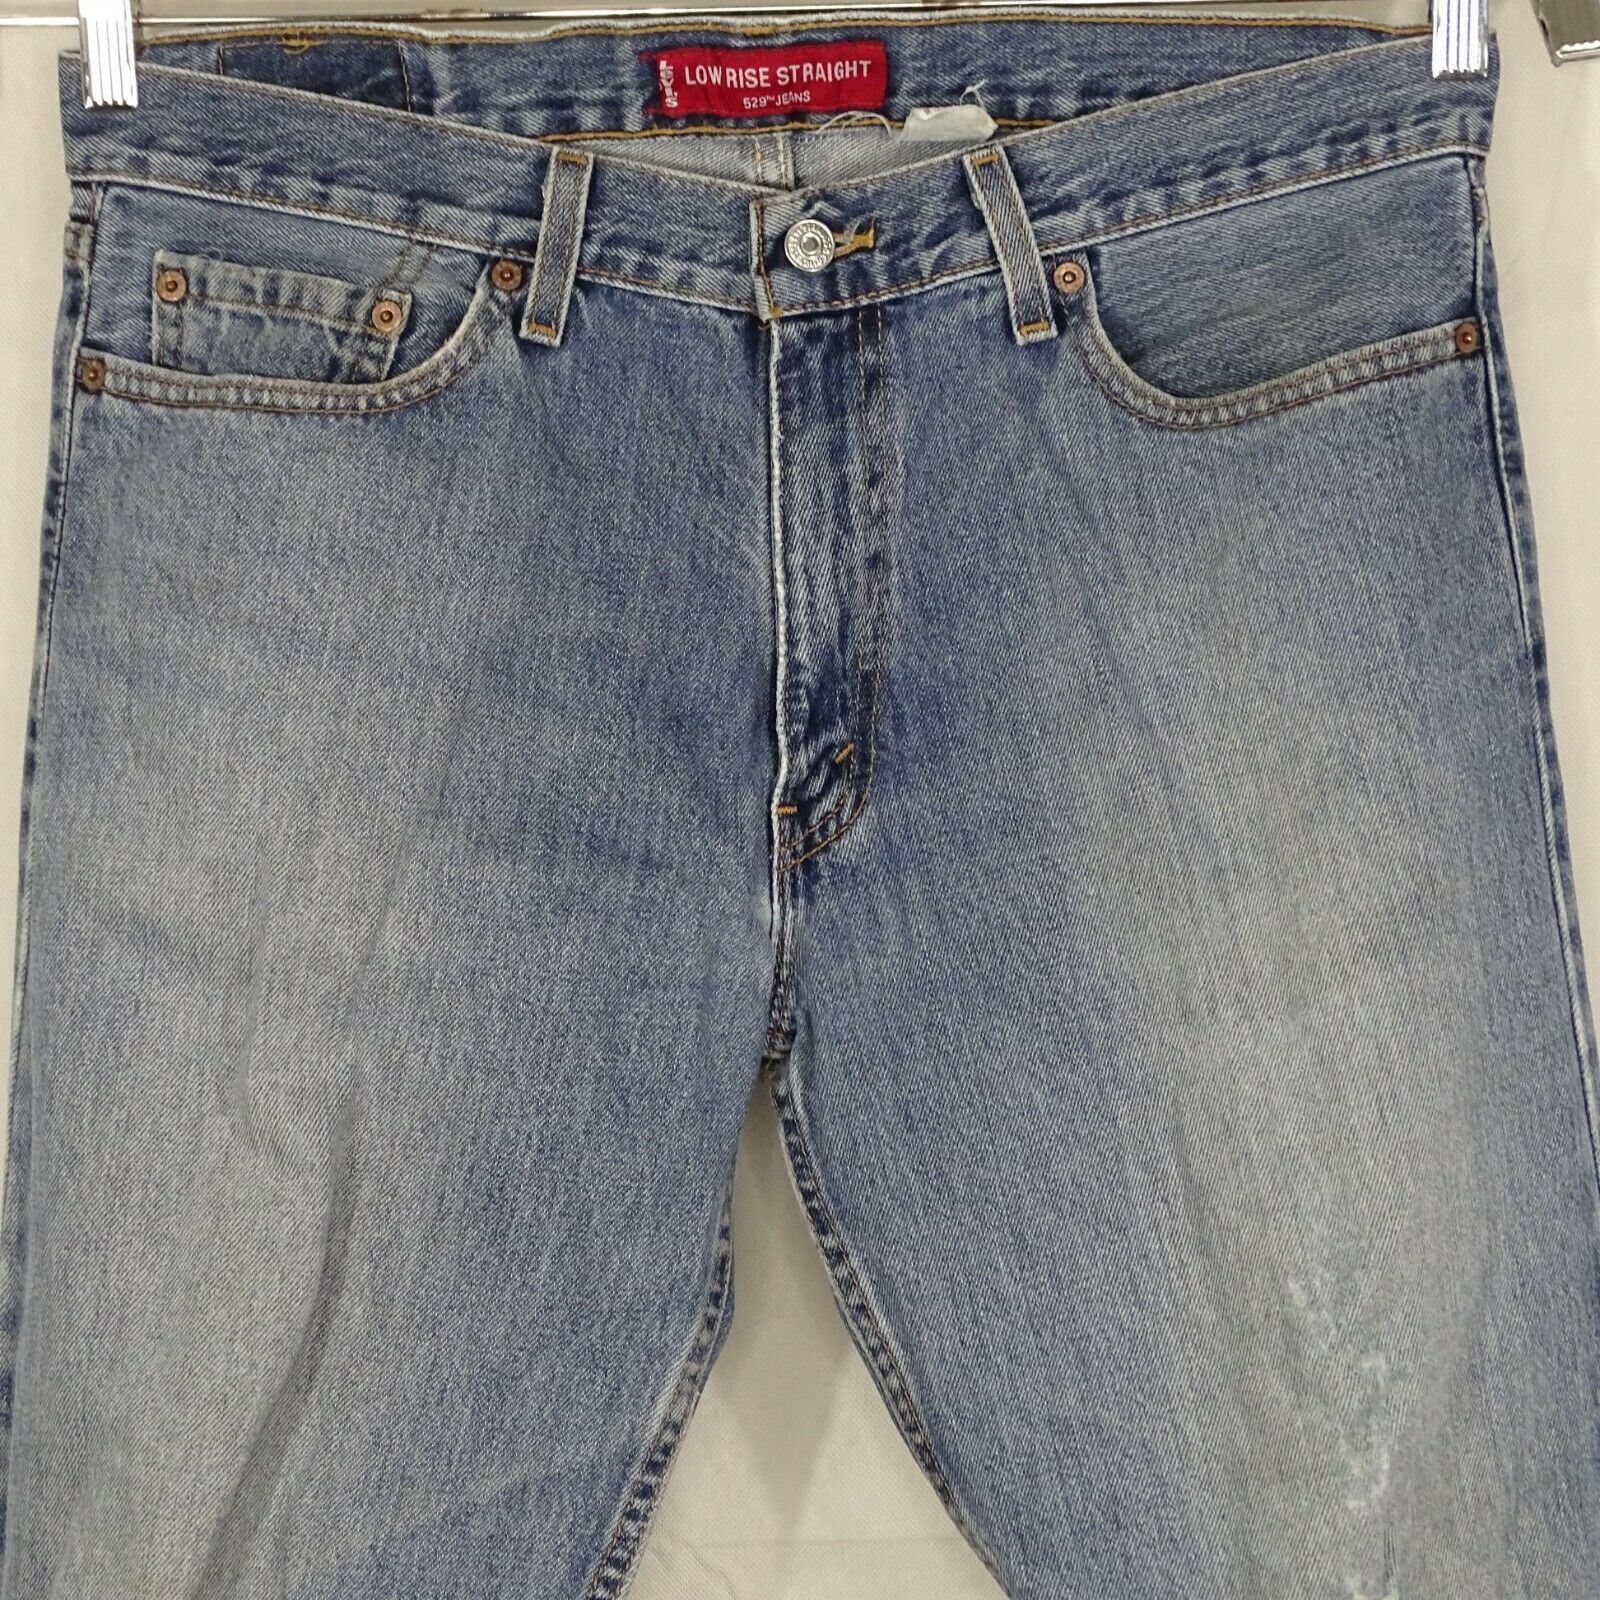 Levis 529 Low Rise Straight Jeans Men Size 34 x 32 Light Wash RIPPED ...